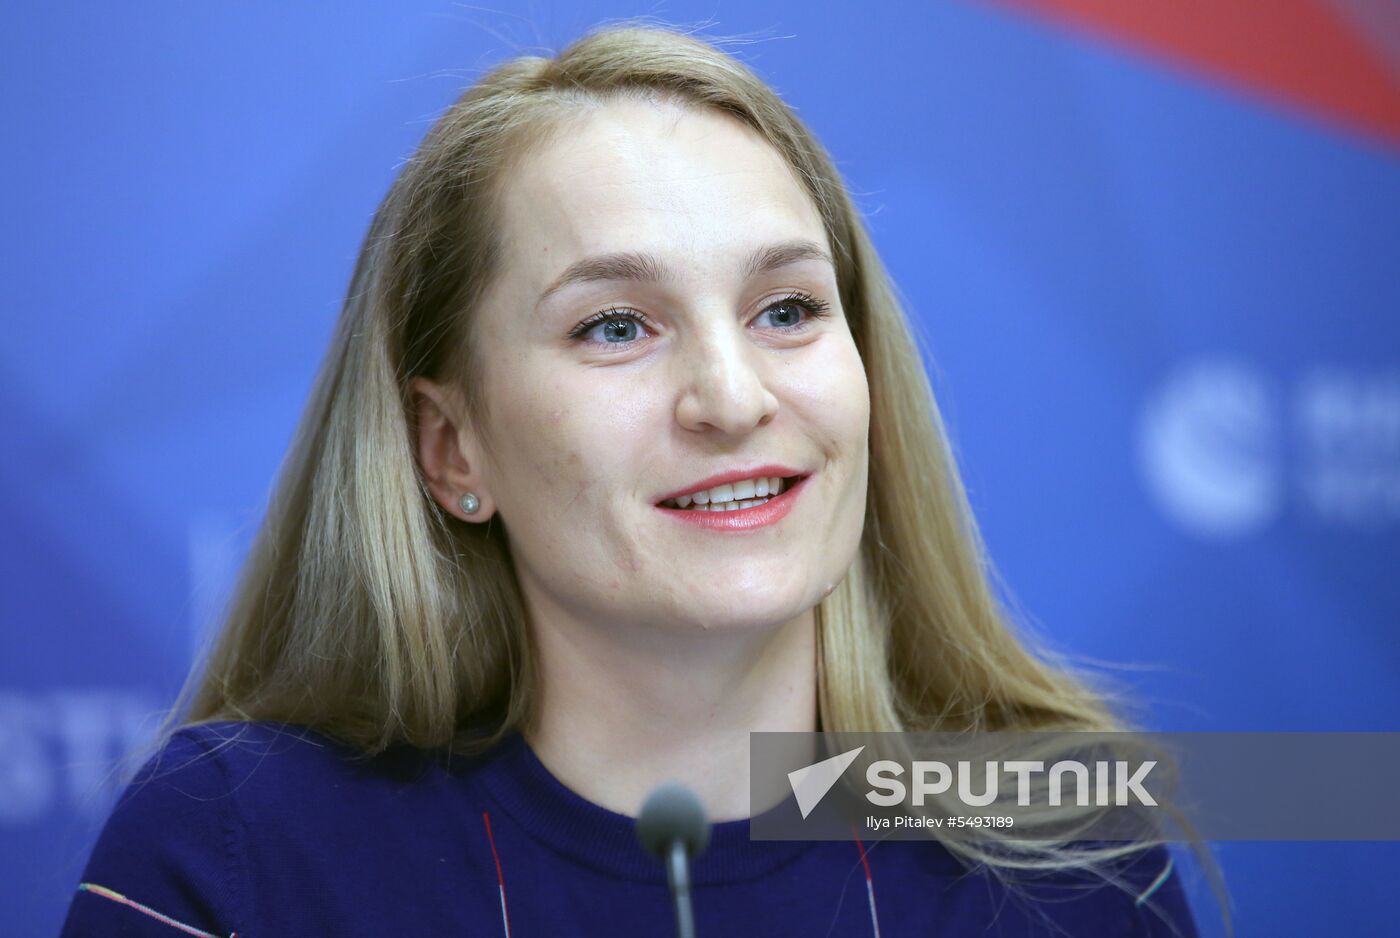 News conference on Grand Prix series of Moscow Saber fencing tournament